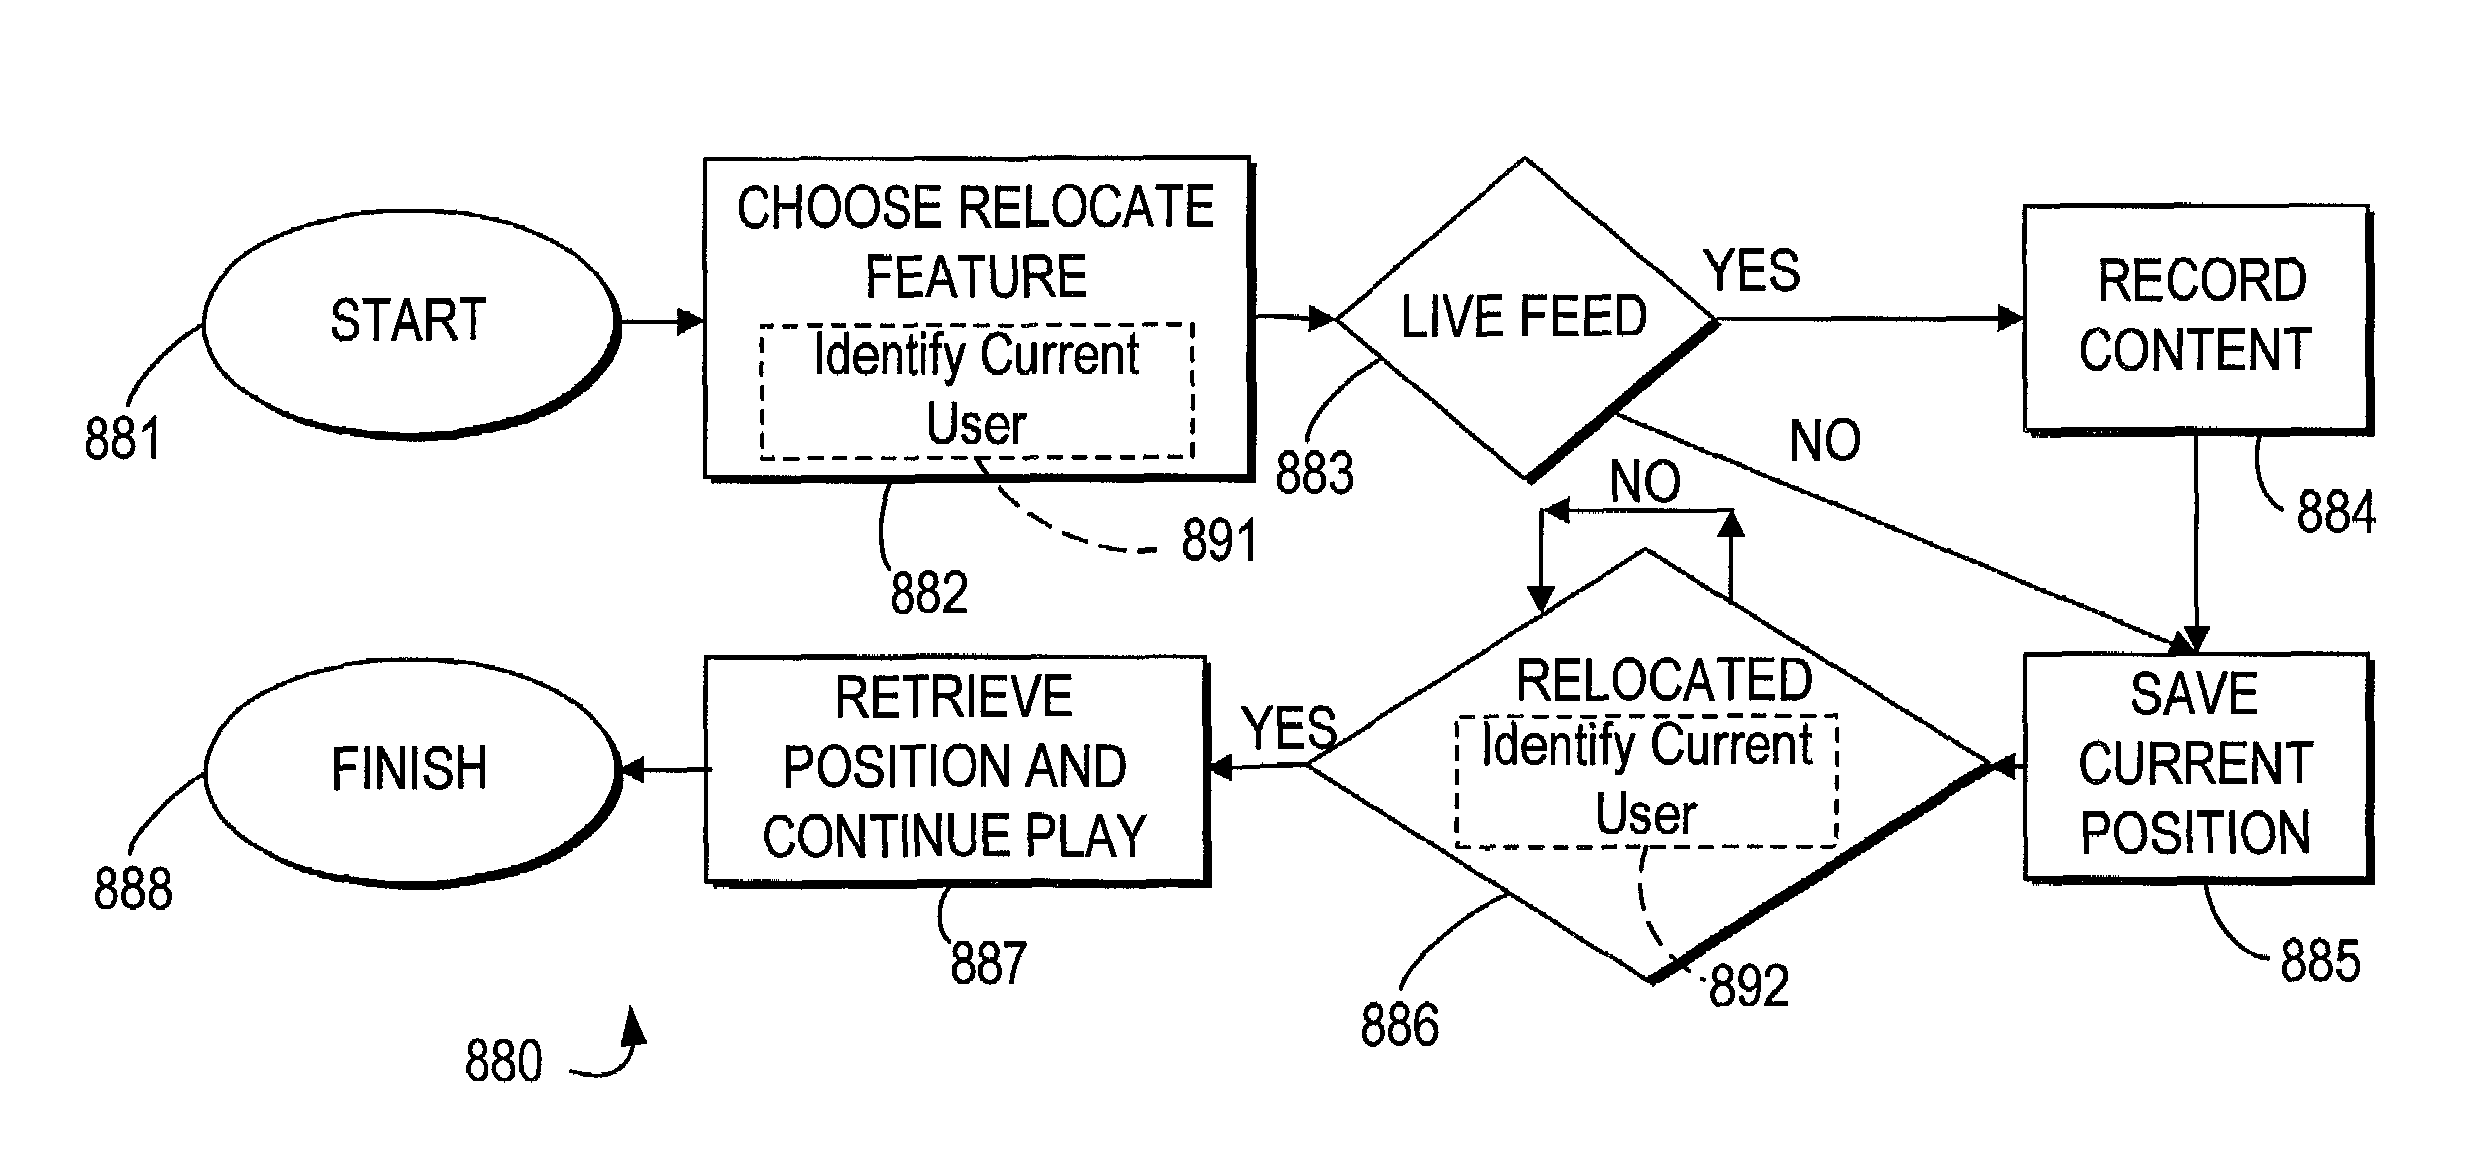 Systems and methods for providing storage of data on servers in an on-demand media delivery system